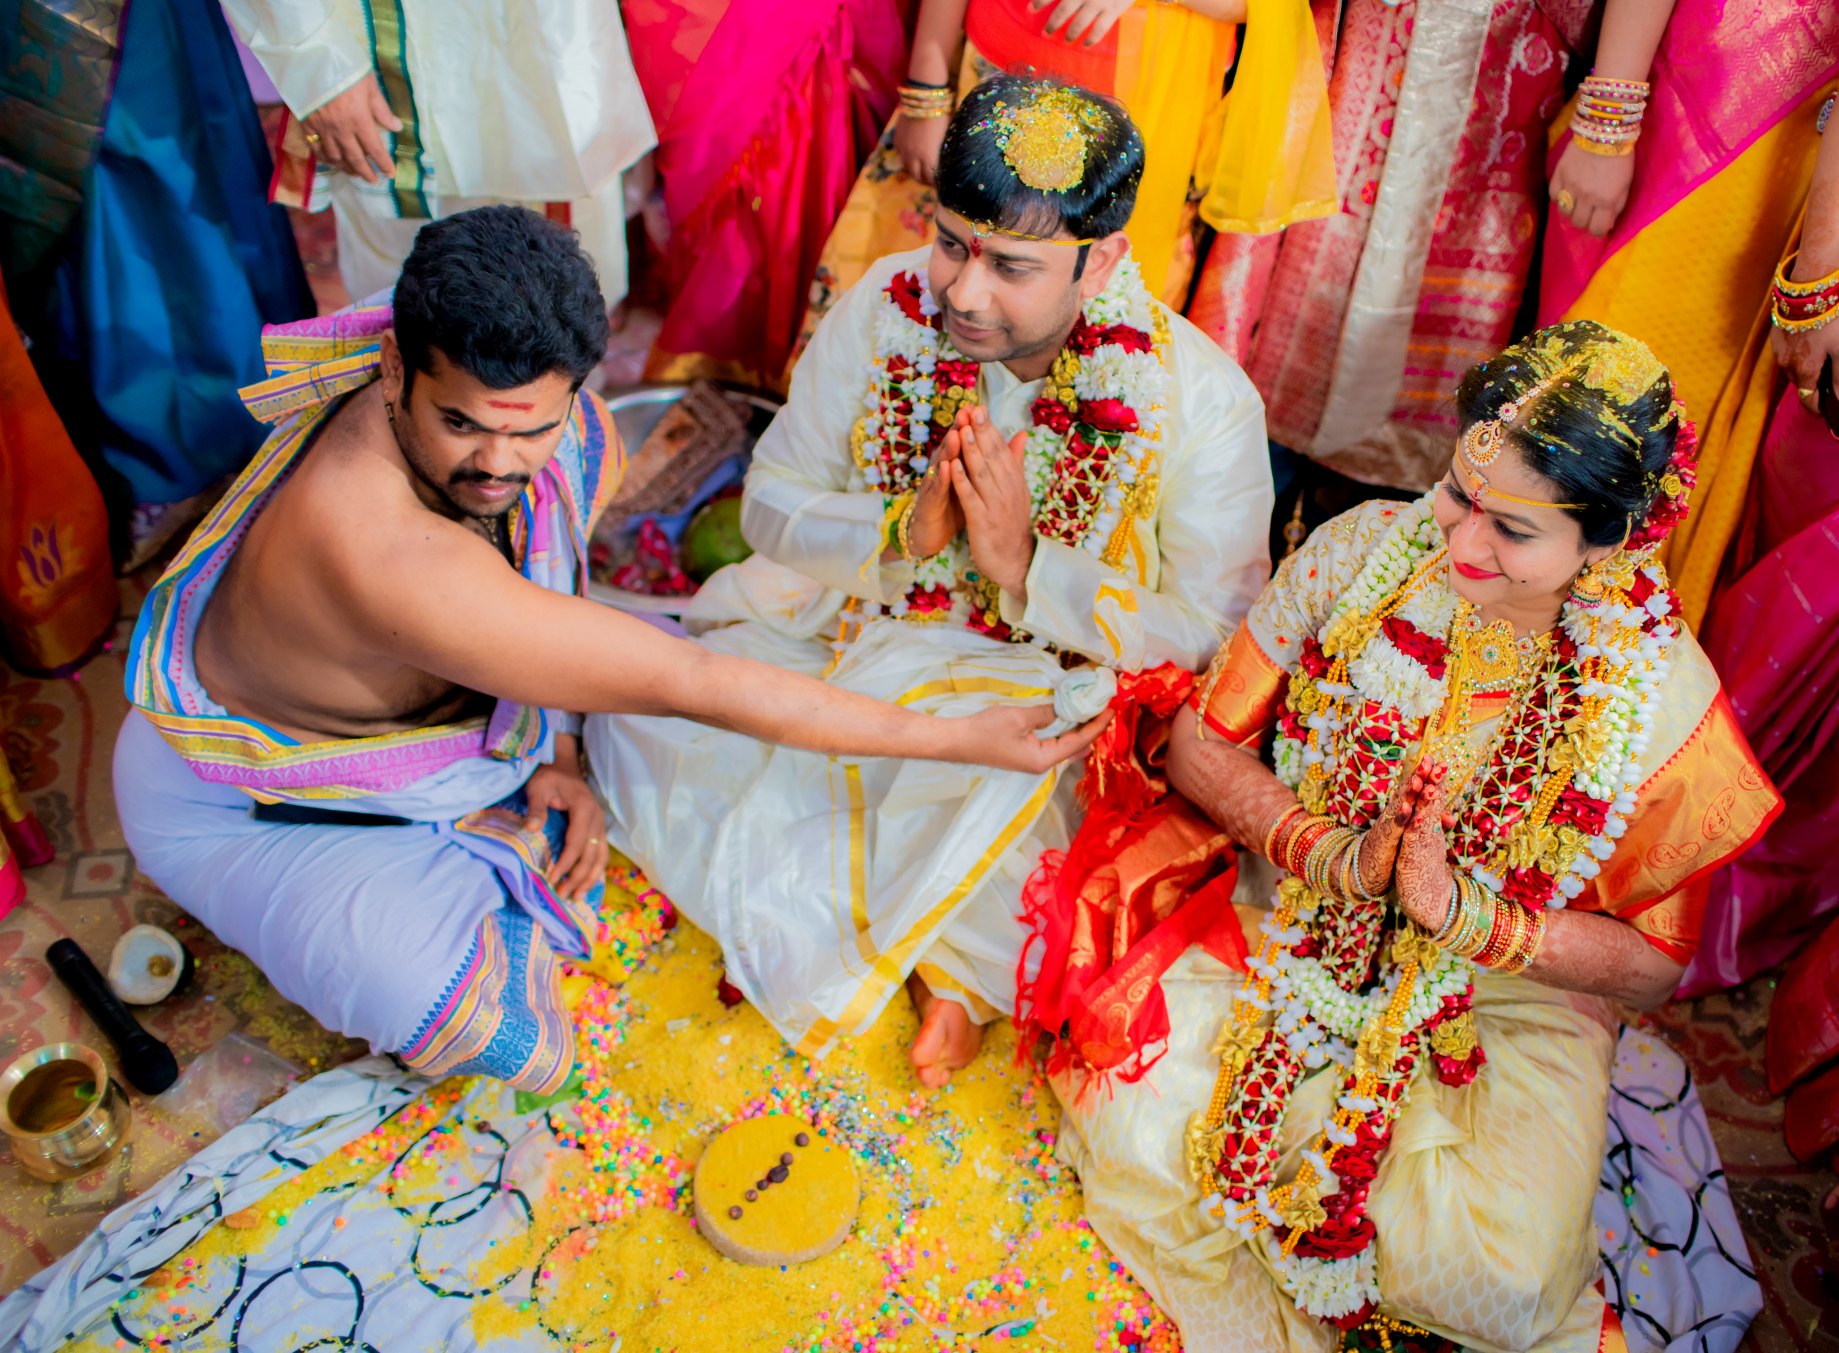 Marriage! Read here when did the tradition start and how - OrissaPOST